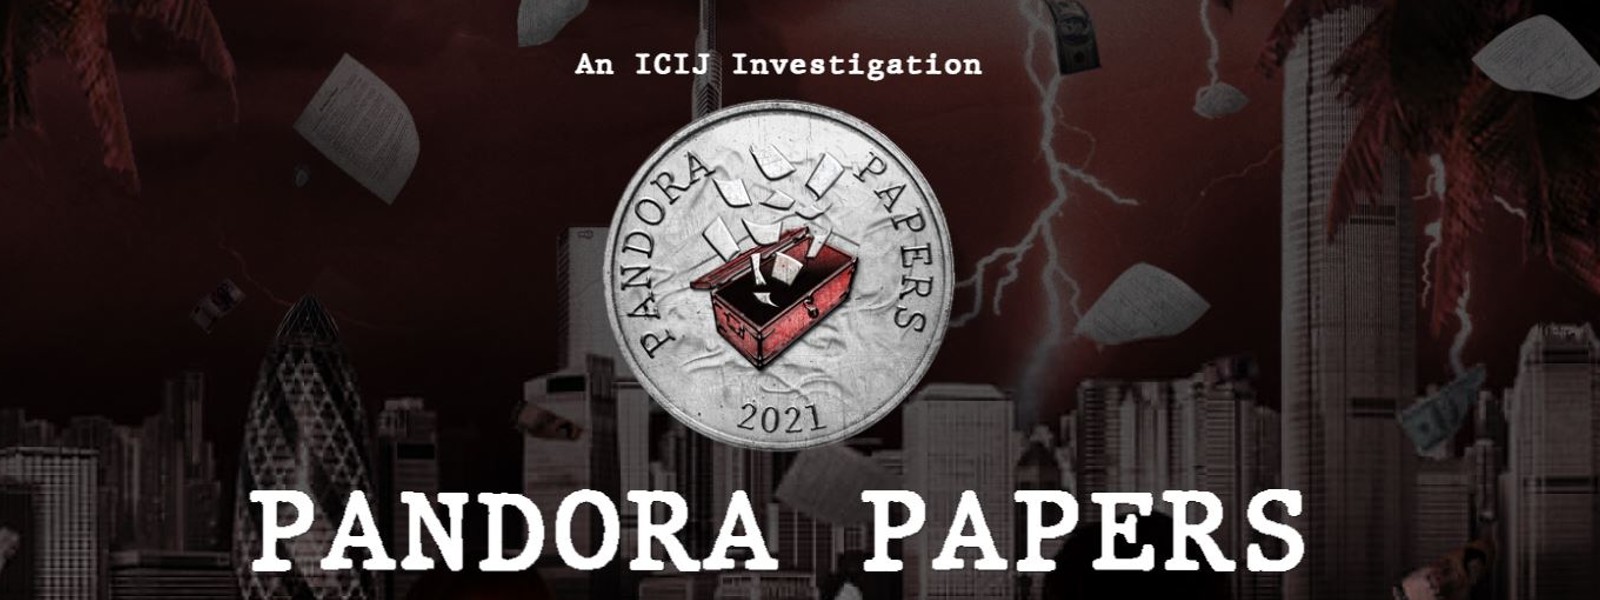 Pandora Papers: Secret wealth and dealings of world leaders exposed